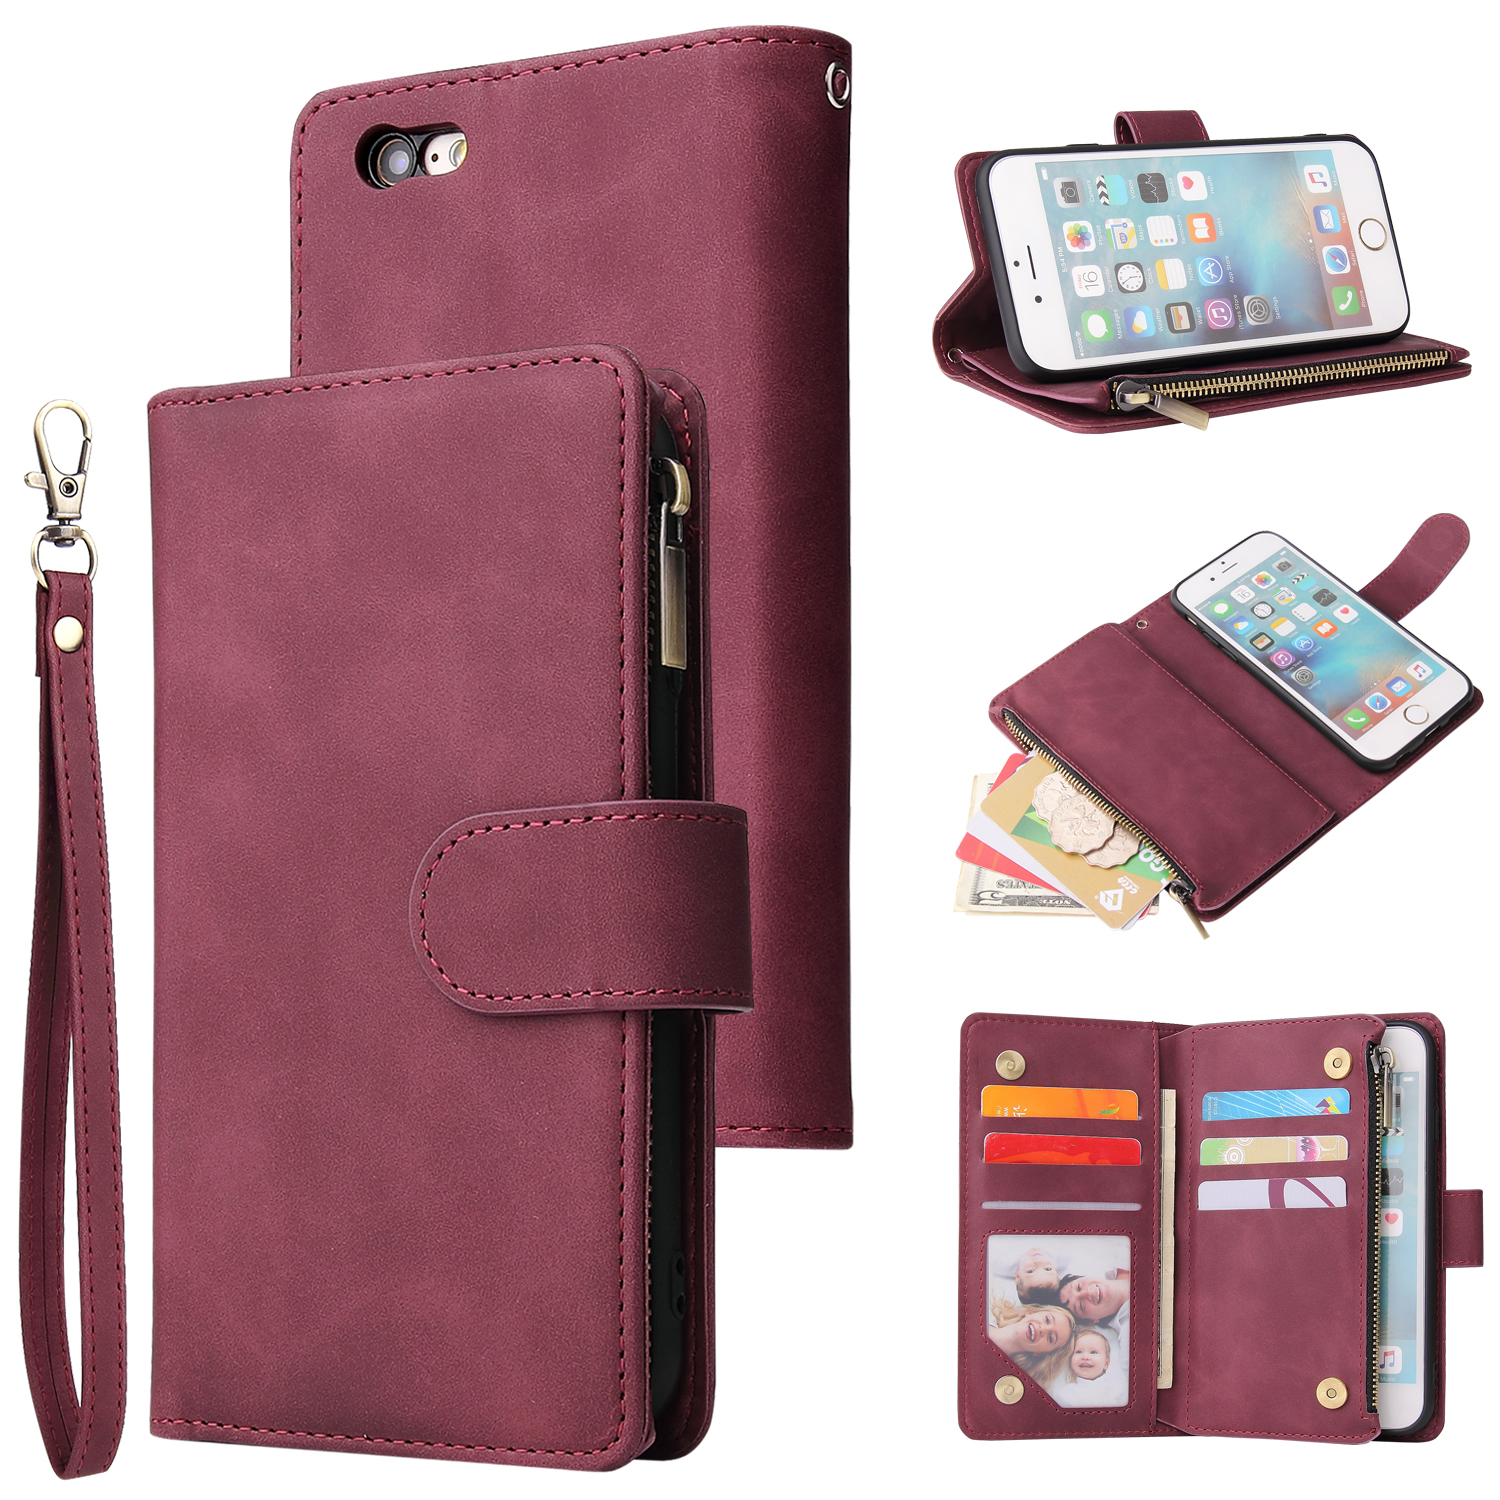 For iPhone 6 / 6S iPhone 6 plus / 6S plus iPhone 7 / 8 iPhone 7 plus / 8 plus Smart Phone Cover Coin Pocket with Cards Bracket Zipper Phone PU Leather Case Phone Cover  iPhone 6 plus / 6S plus